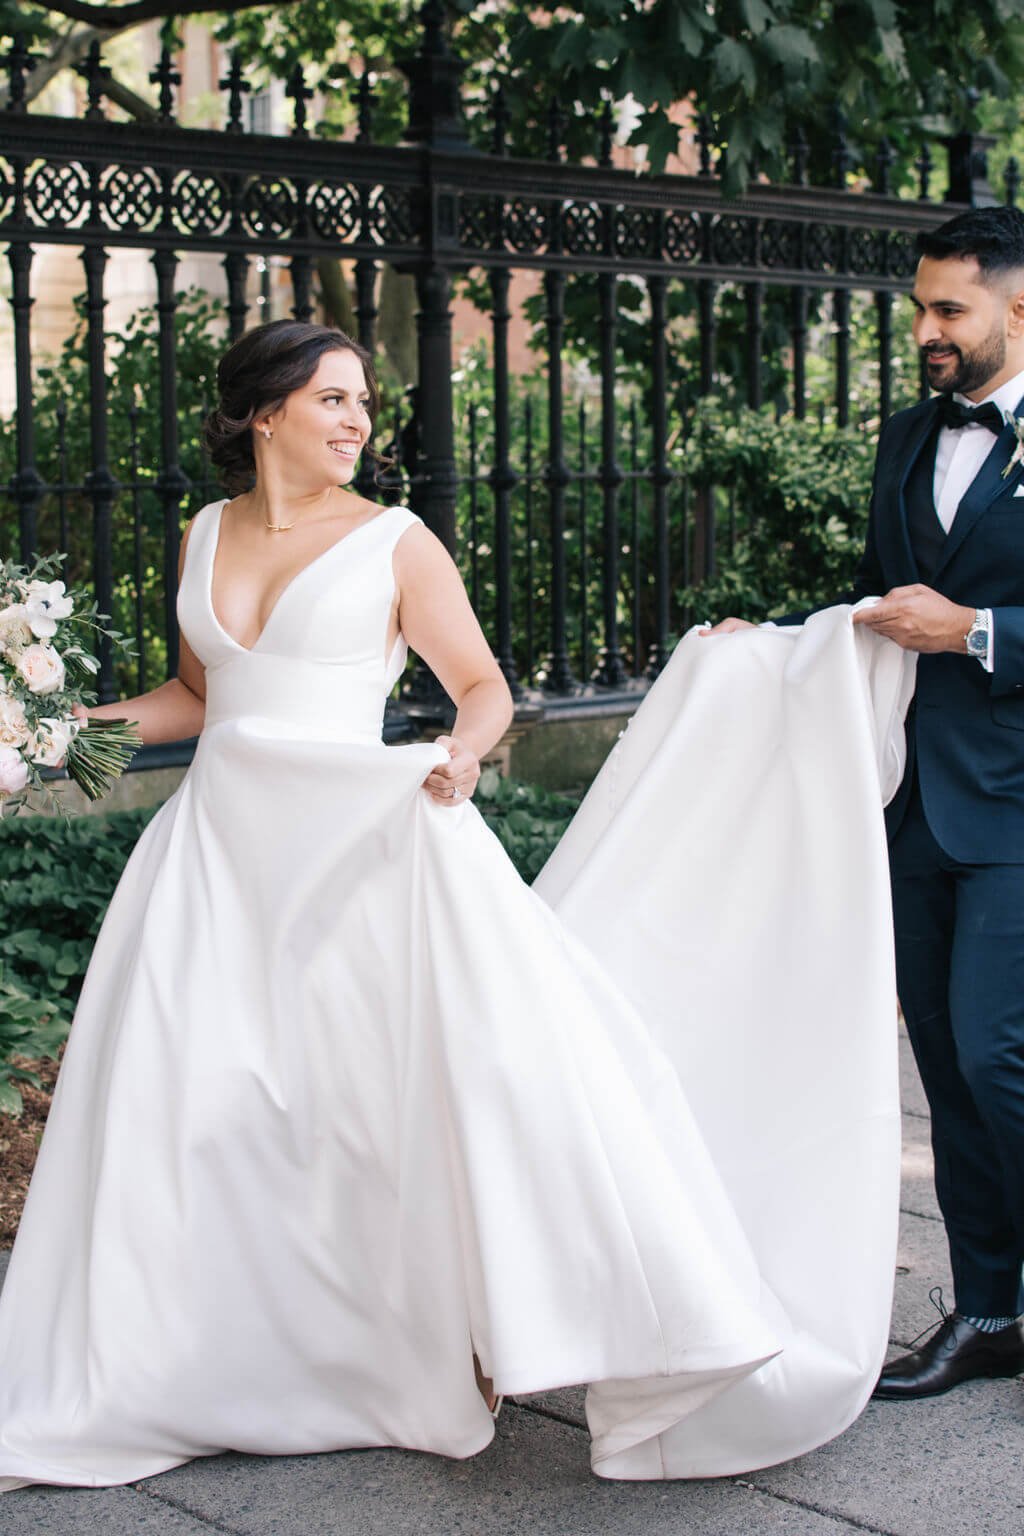 Timeless Toronto wedding photography by Toronto wedding photographers, Ugo Photography